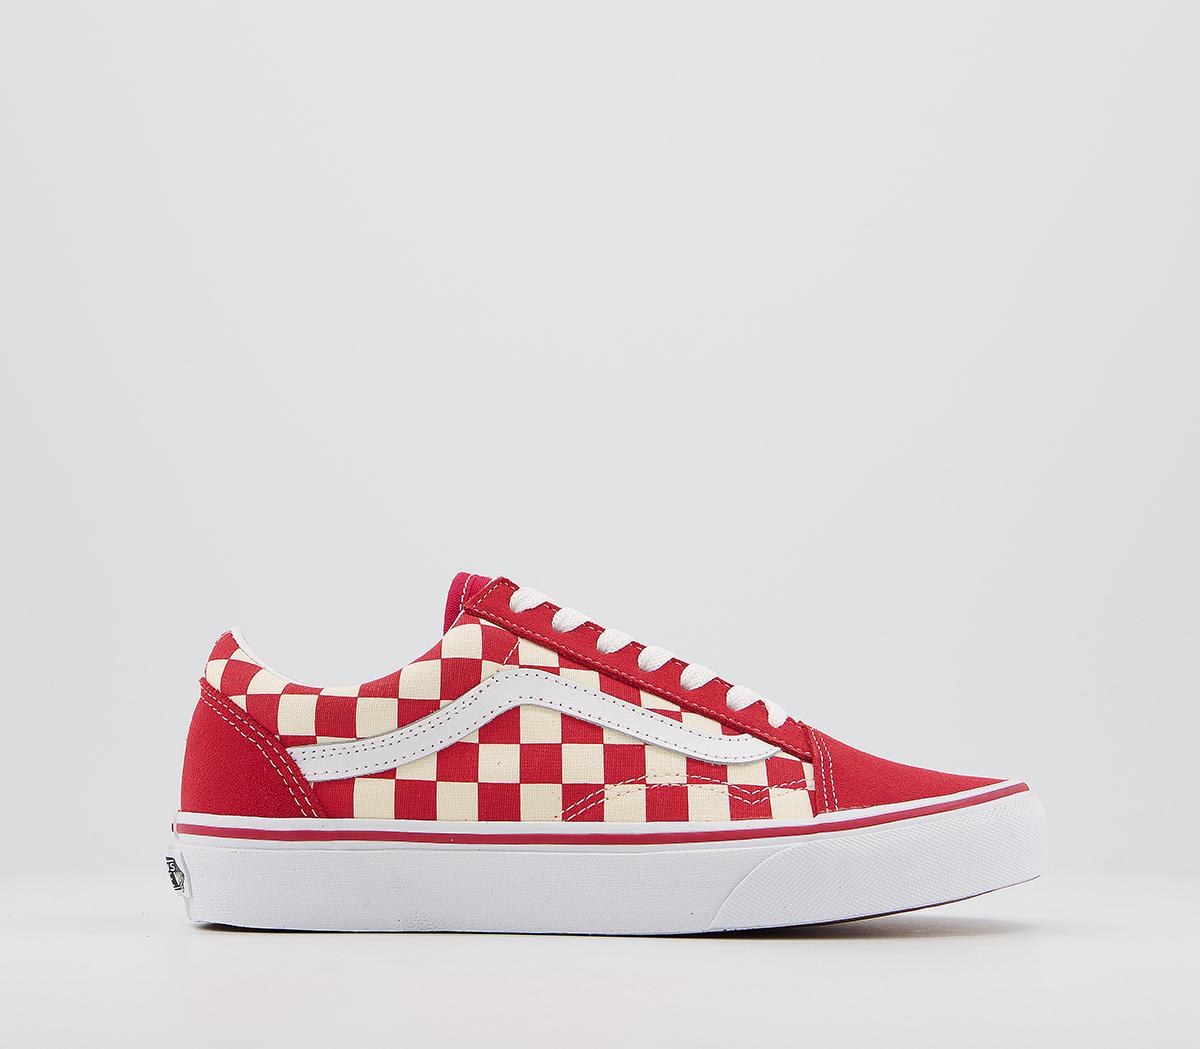 VansOld Skool TrainersRed White Primary Check